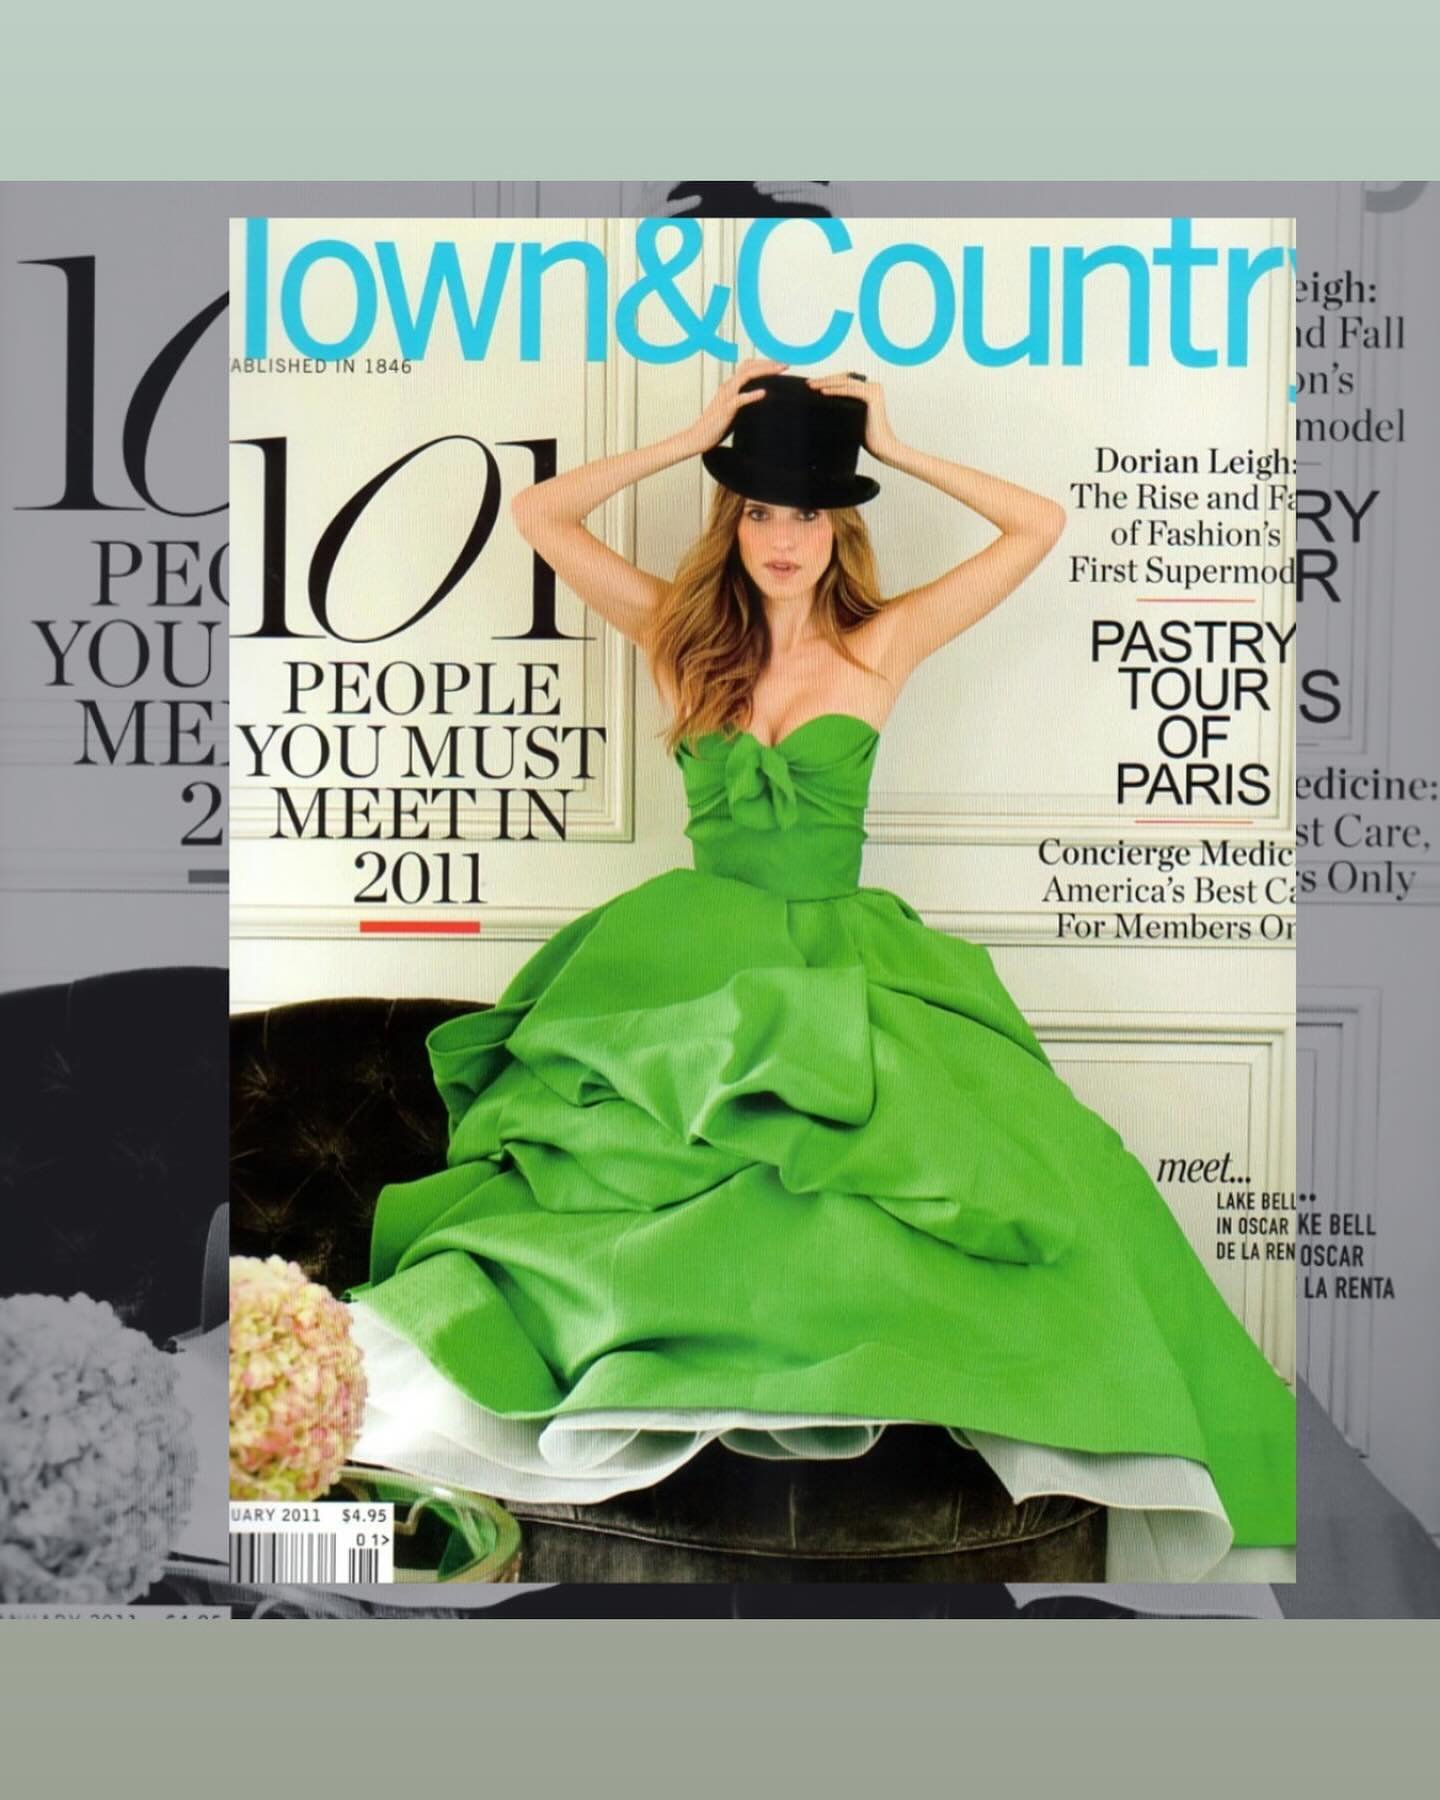 Lake Bell for the cover of Town &amp; Country, one of my last covers before I left Los Angeles, January 2011.
#dallashair #dallasstylist #cutsbyLB #universitypark #dallashairsalon #highlandpark #texashair #smu #wellacolorcraftspecialist